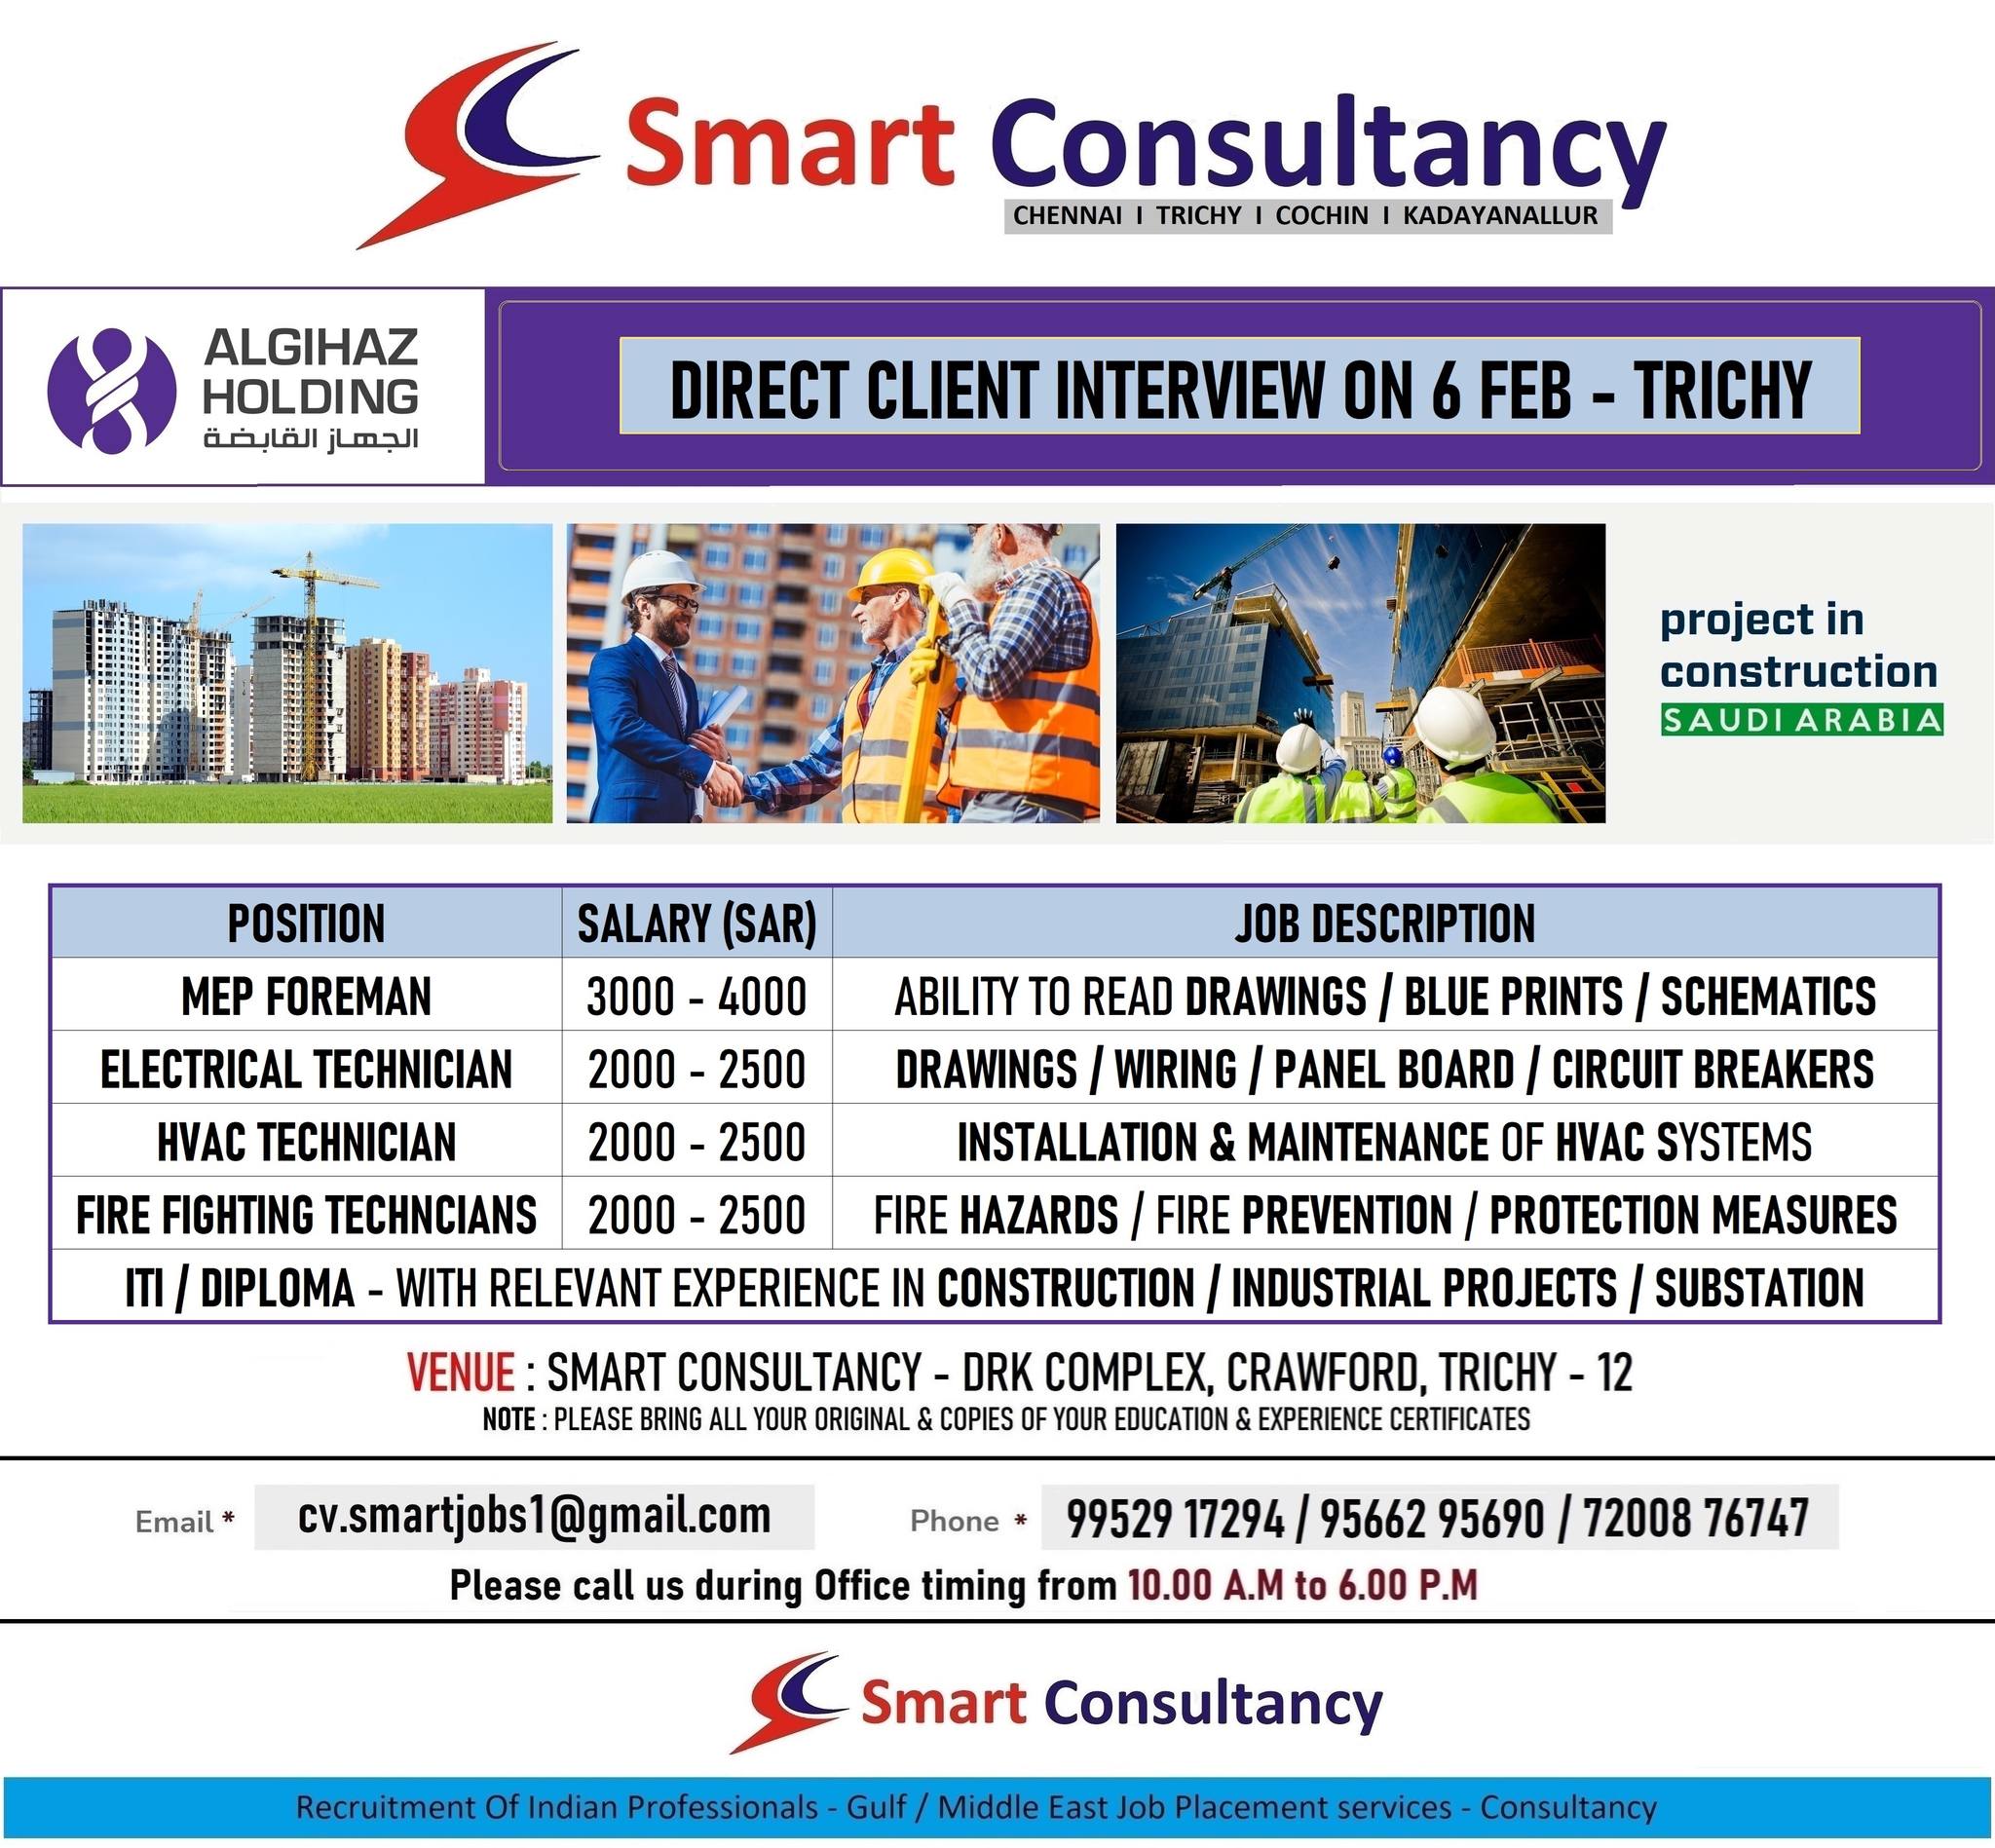 WANTED FOR A LEADING CONSTRUCTION / SUBSTATION COMPANY – SAUDI / DIRECT CLIENT INTERVIEW ON 6 FEB – TRICHY